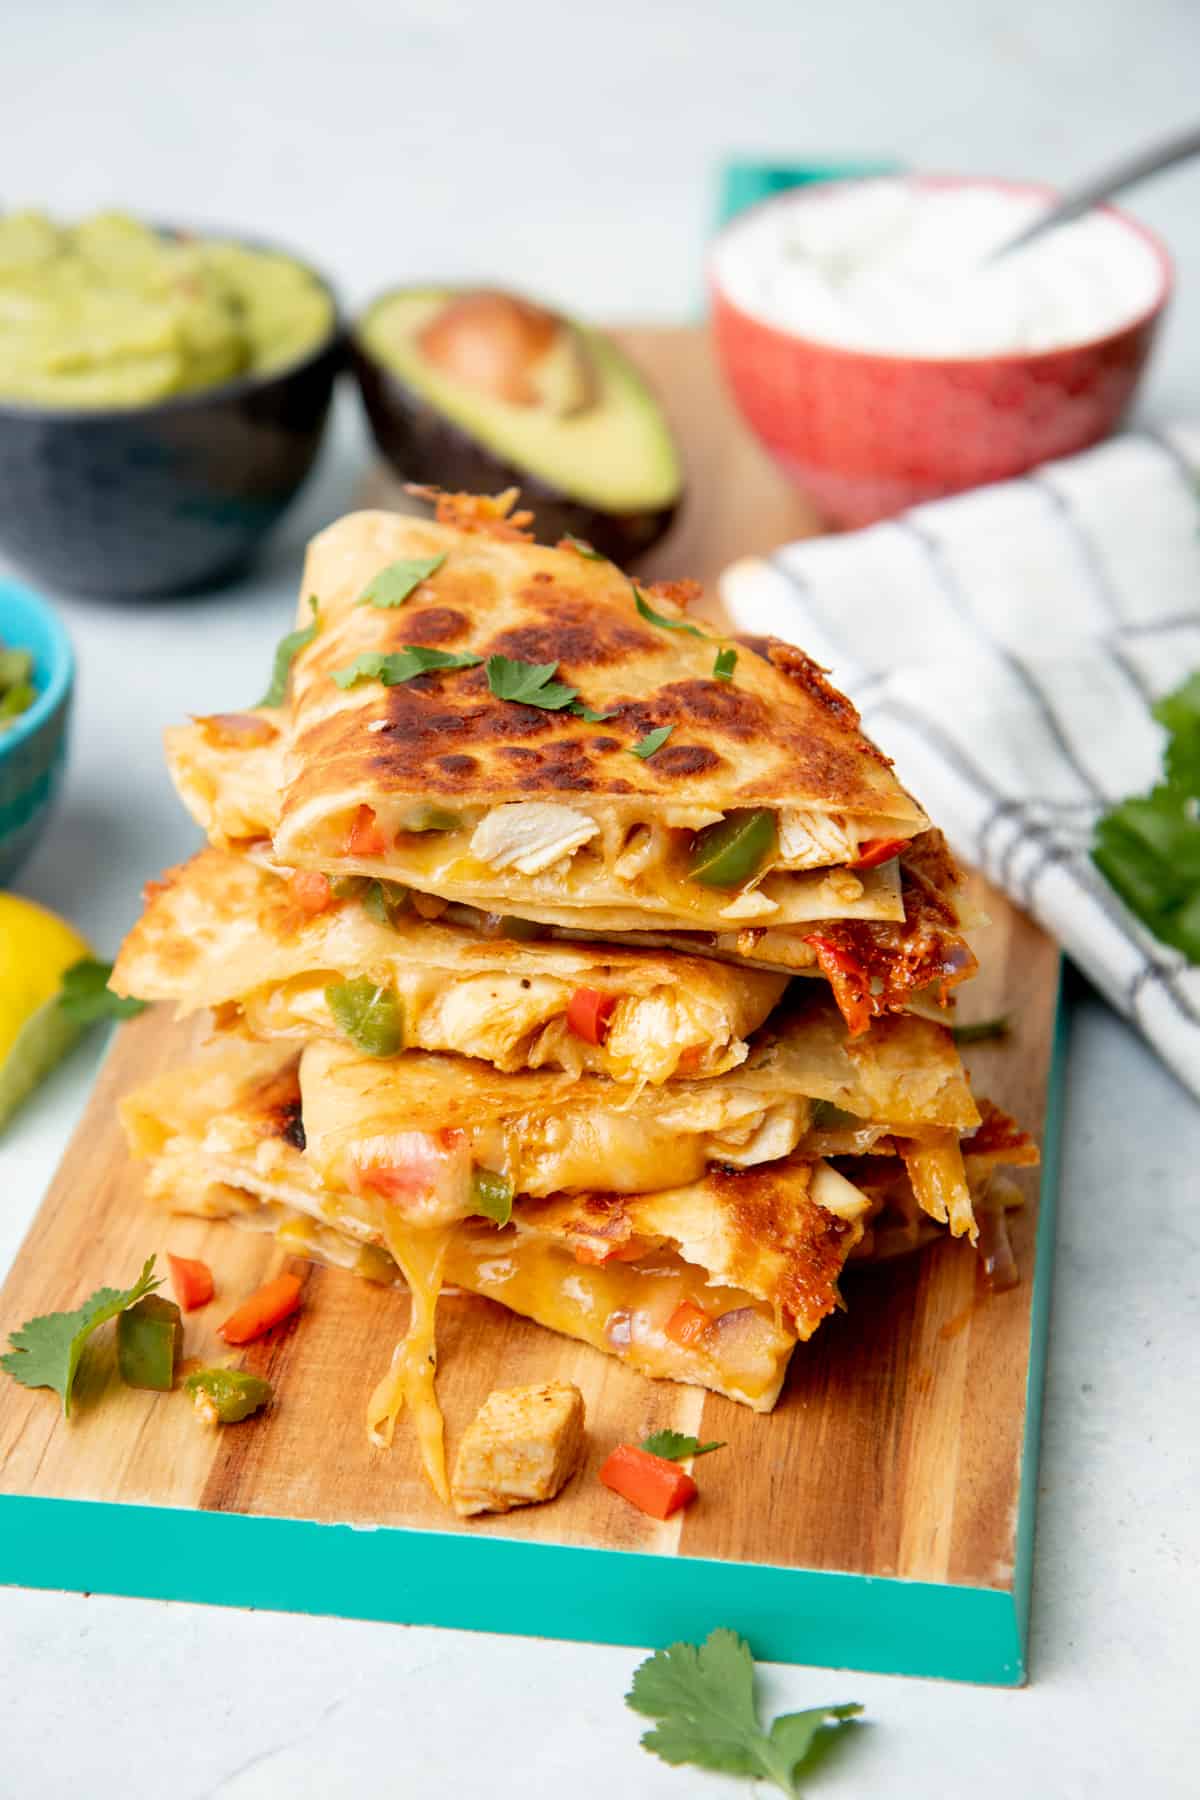 A stack of quesadillas sits on a wooden cutting board. A red bowl of sour cream sits in the background.